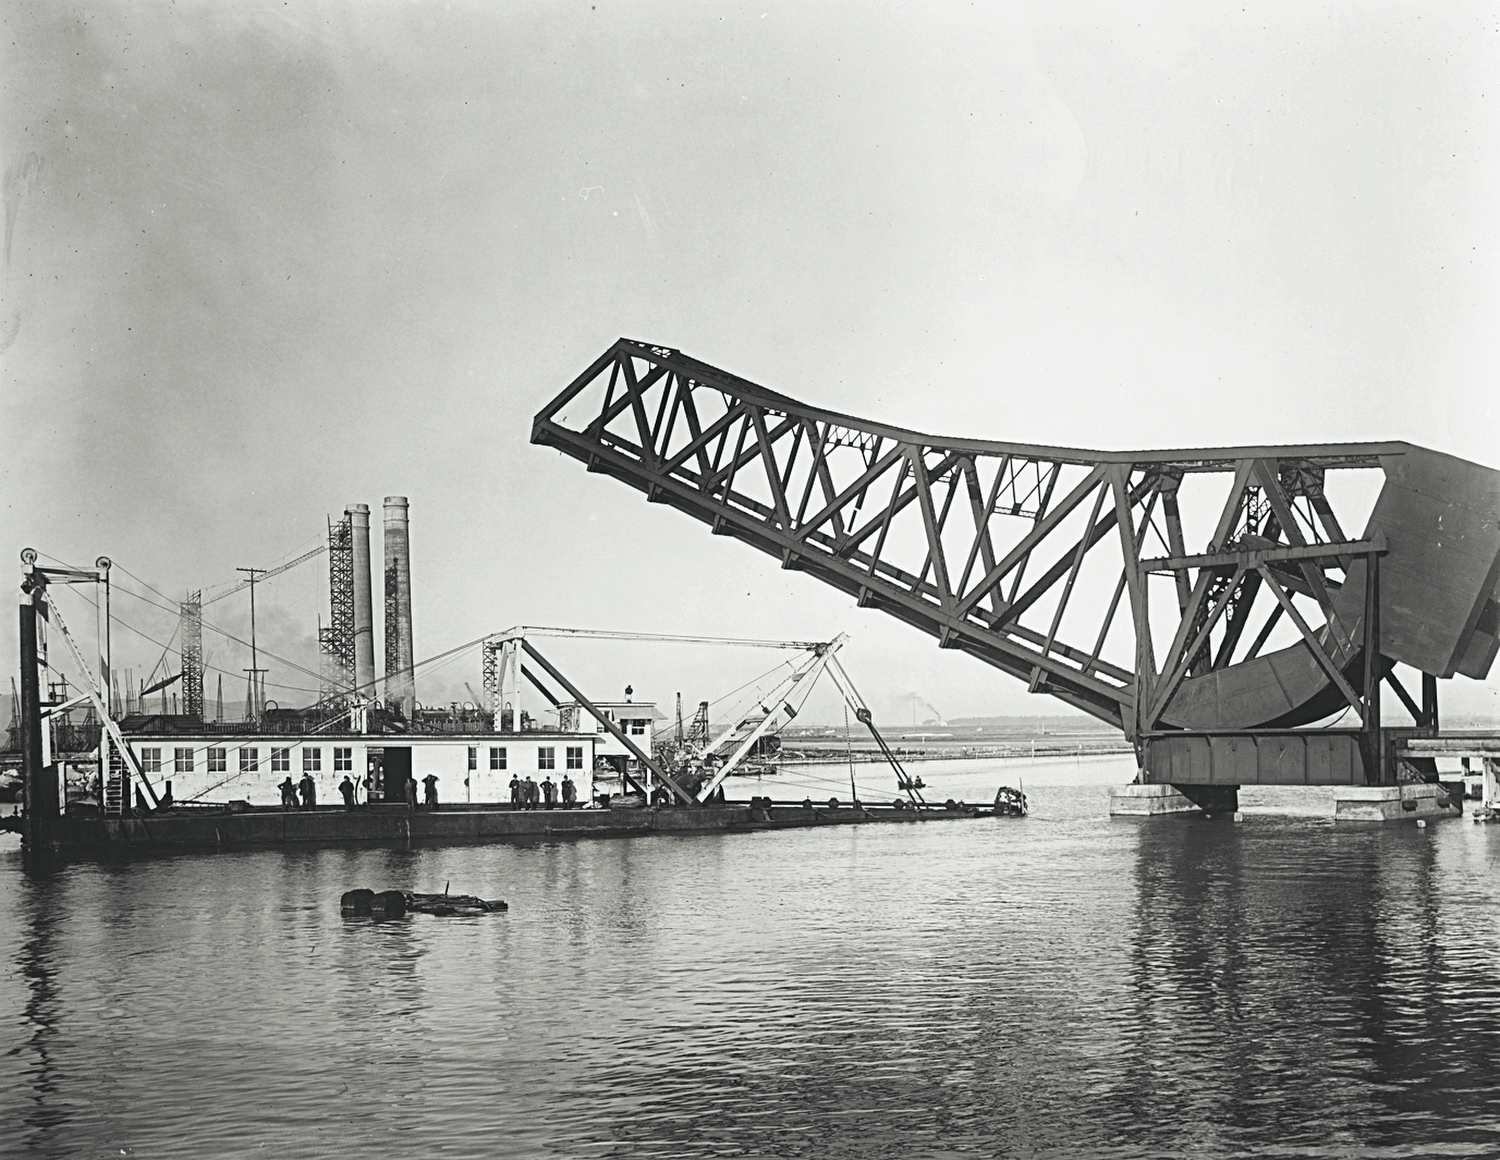 The bascule or Òjack-knifeÓ bridge for the Salt Lake Railroad was the first span to connect Long Beach and Terminal Island.